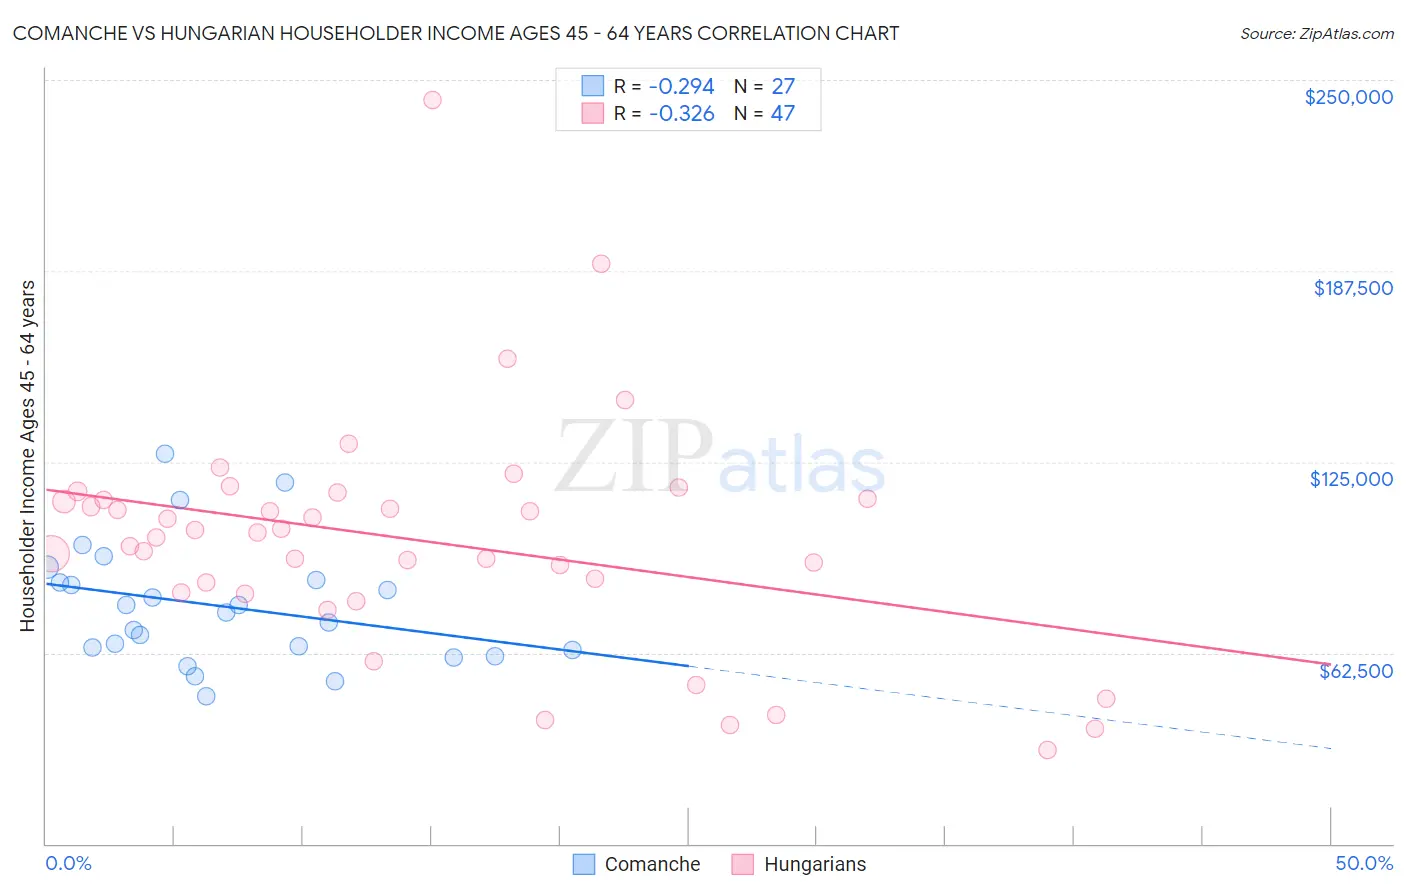 Comanche vs Hungarian Householder Income Ages 45 - 64 years